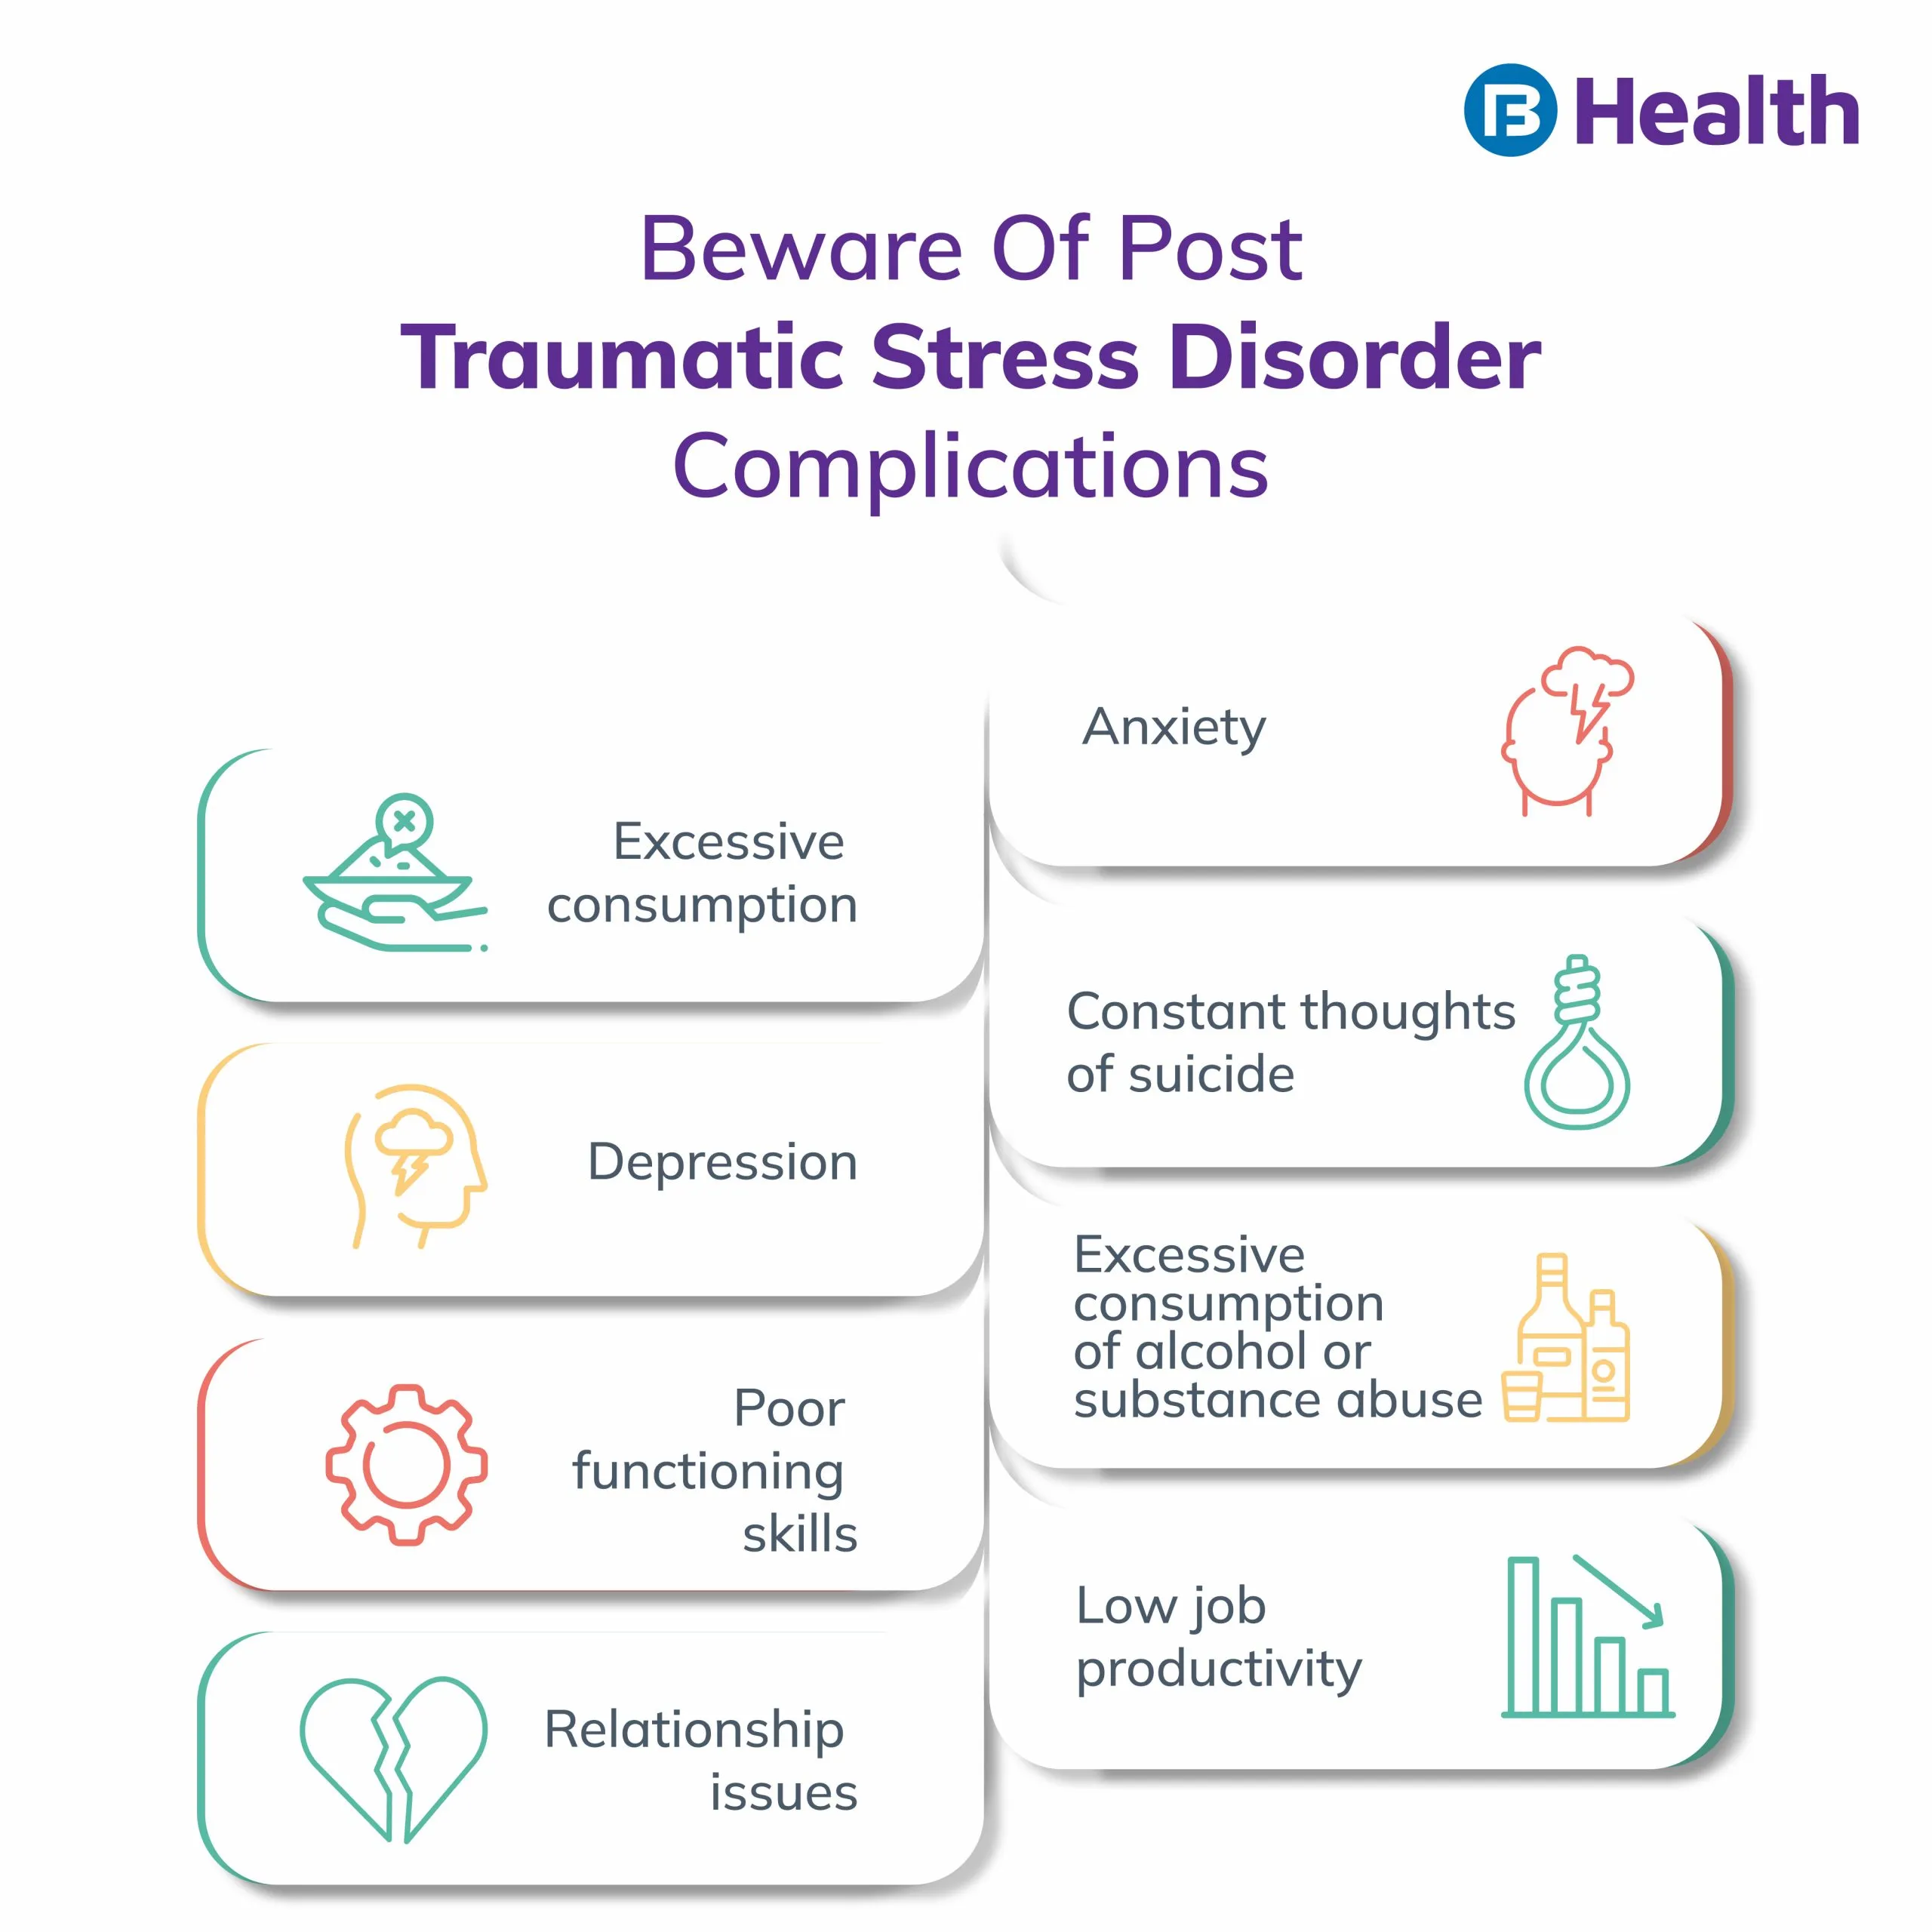 Post traumatic Stress Disorder complications